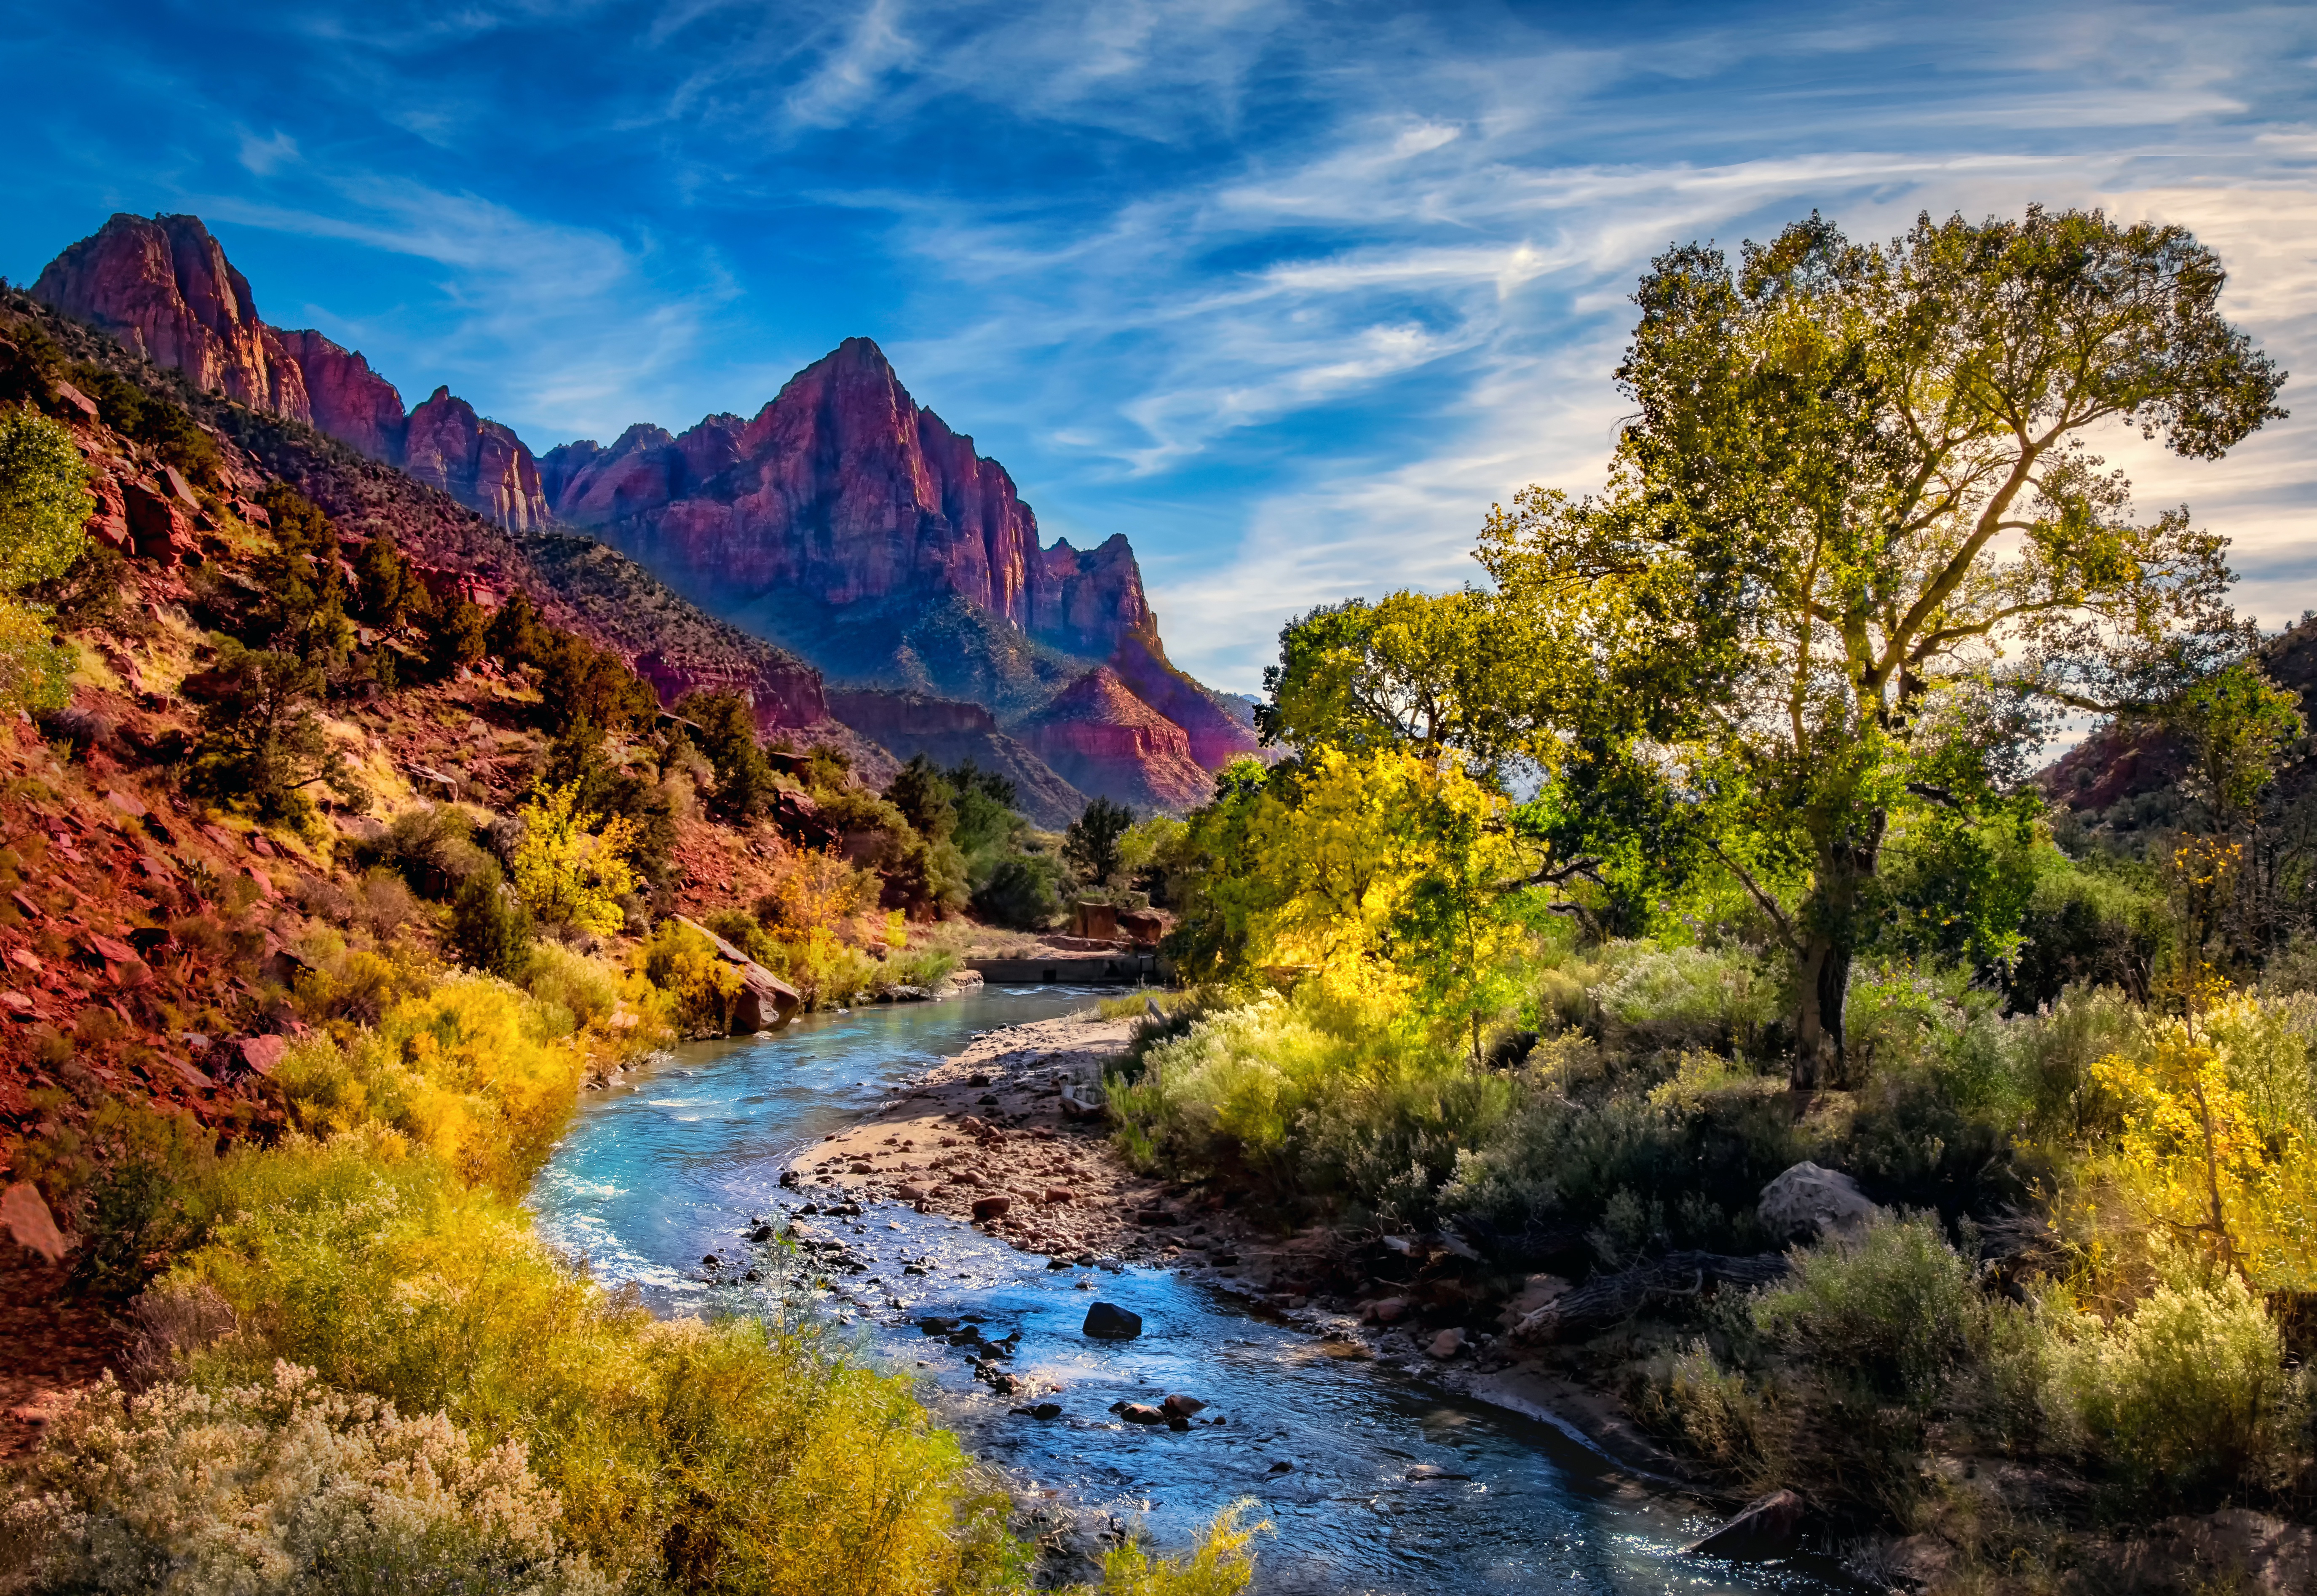 zion national park, earth, canyon, landscape, mountain, river, tree, national park